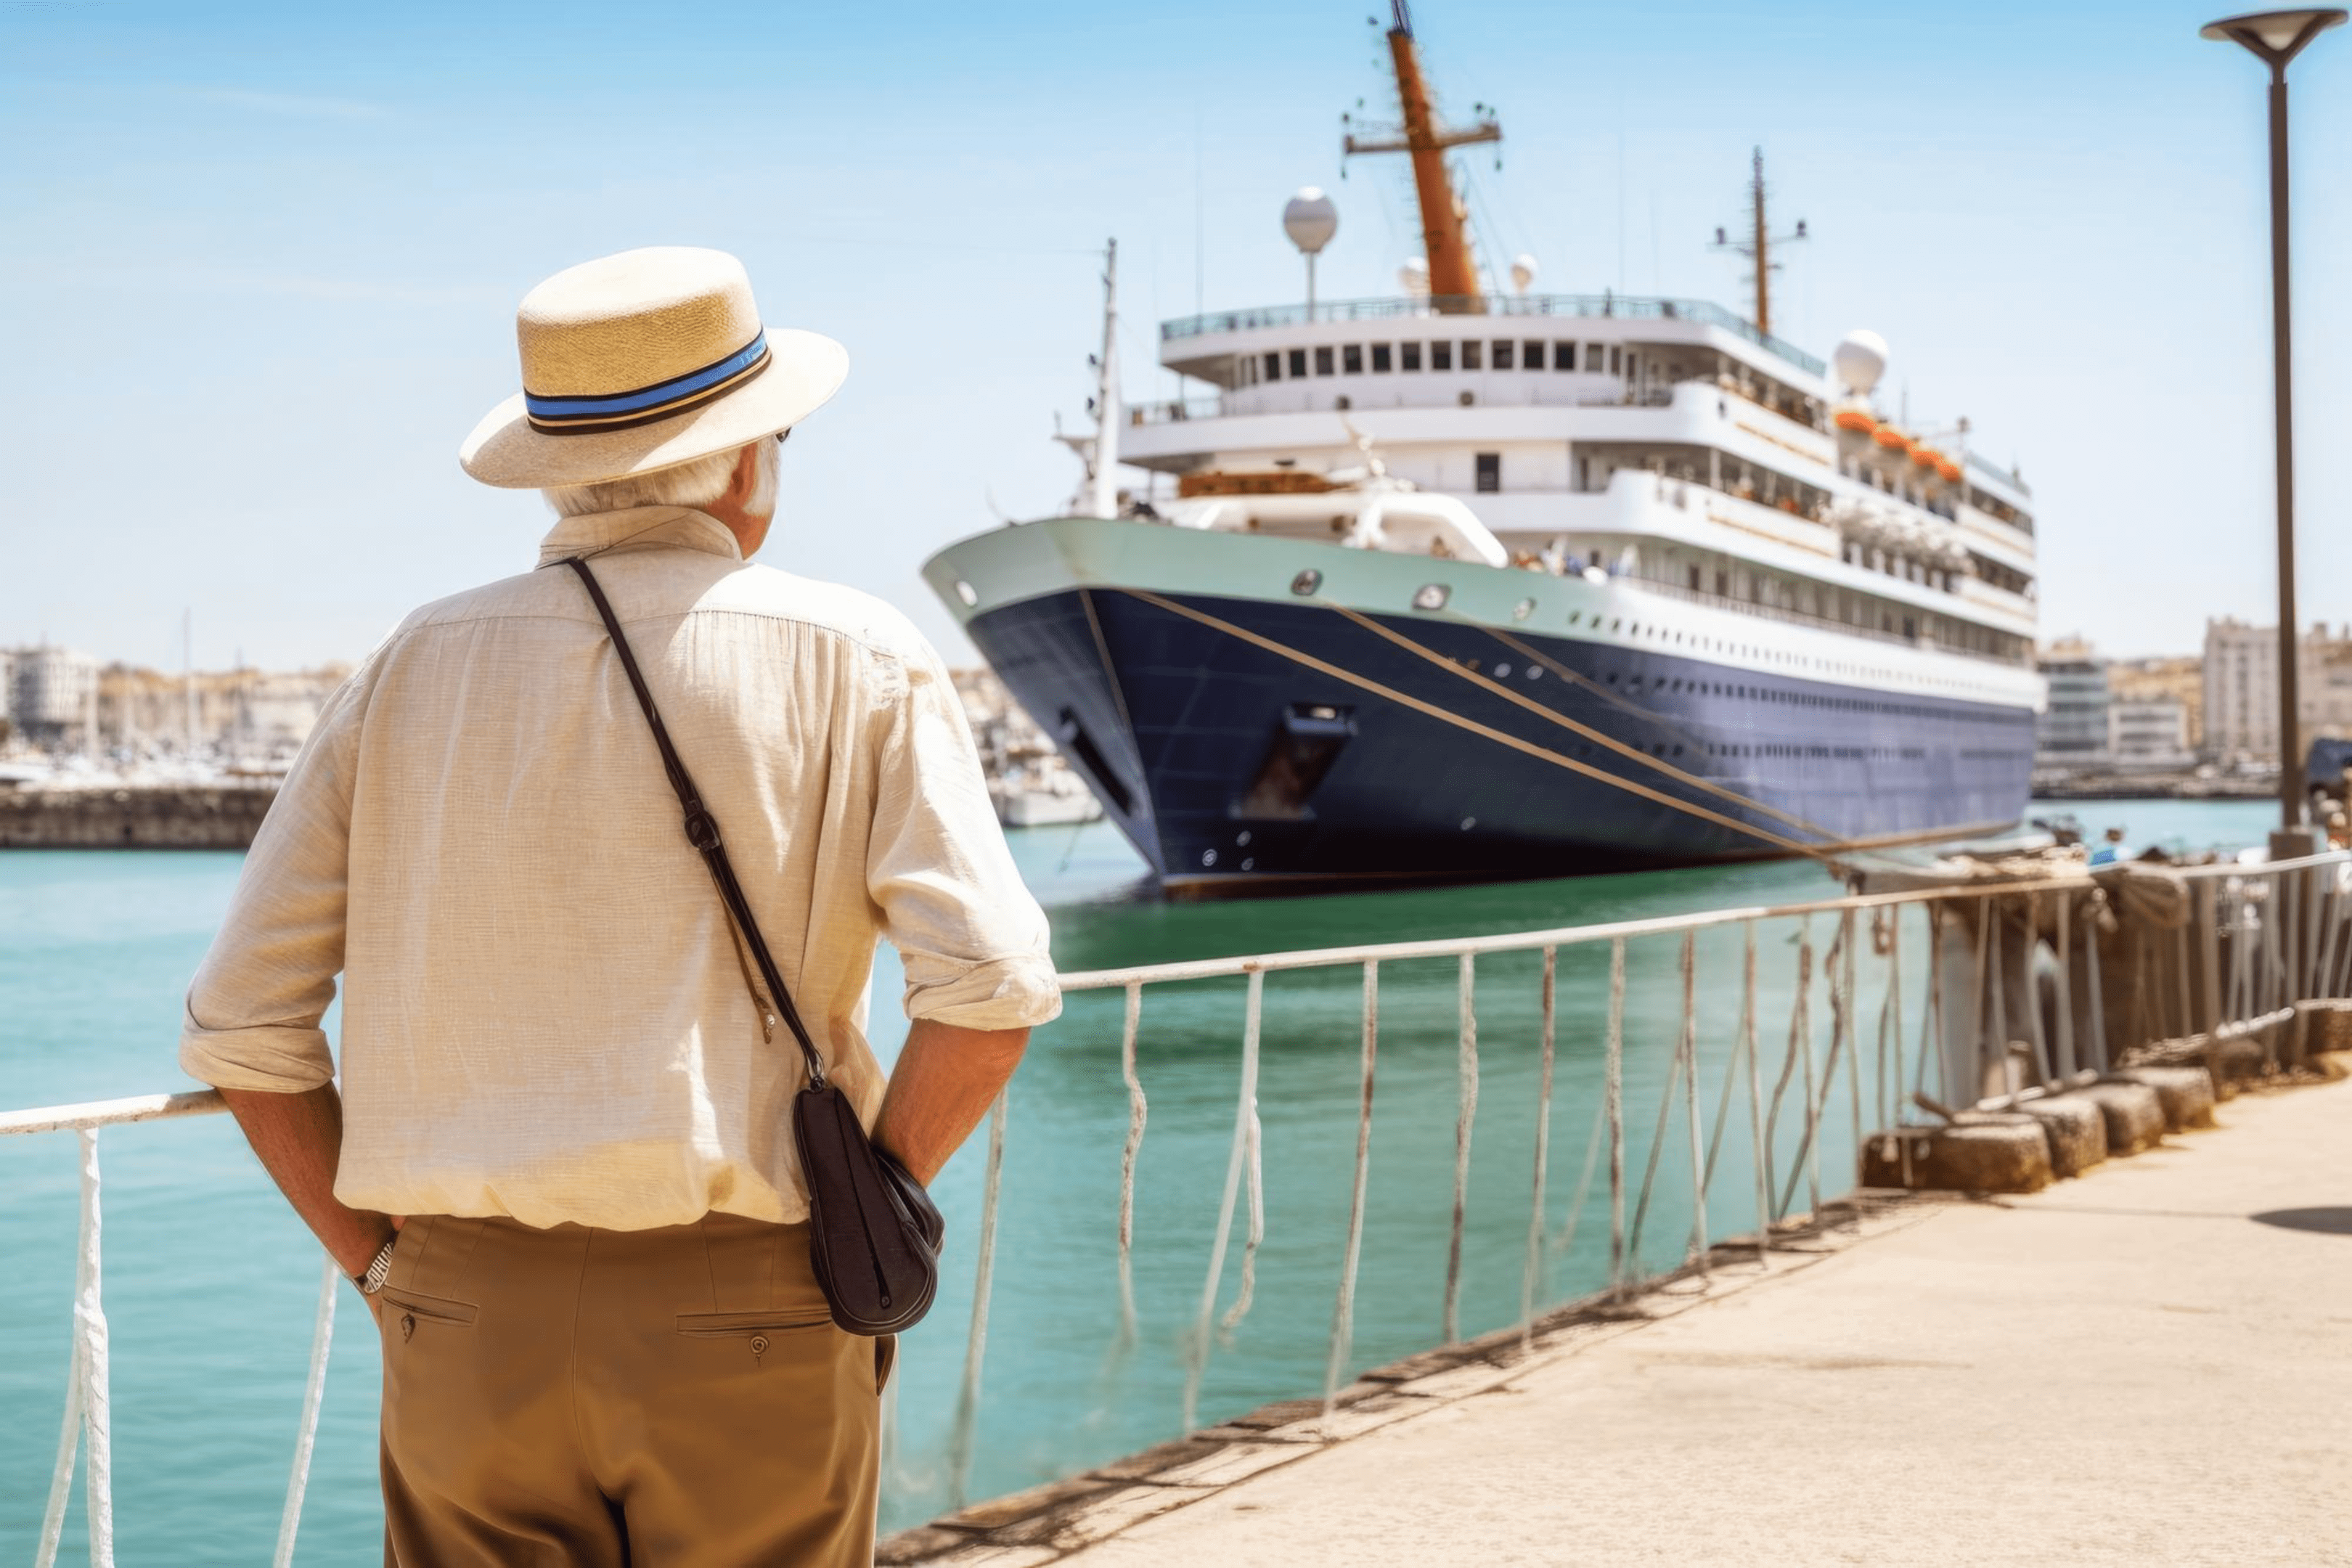 cost of a voyage on cruise ship